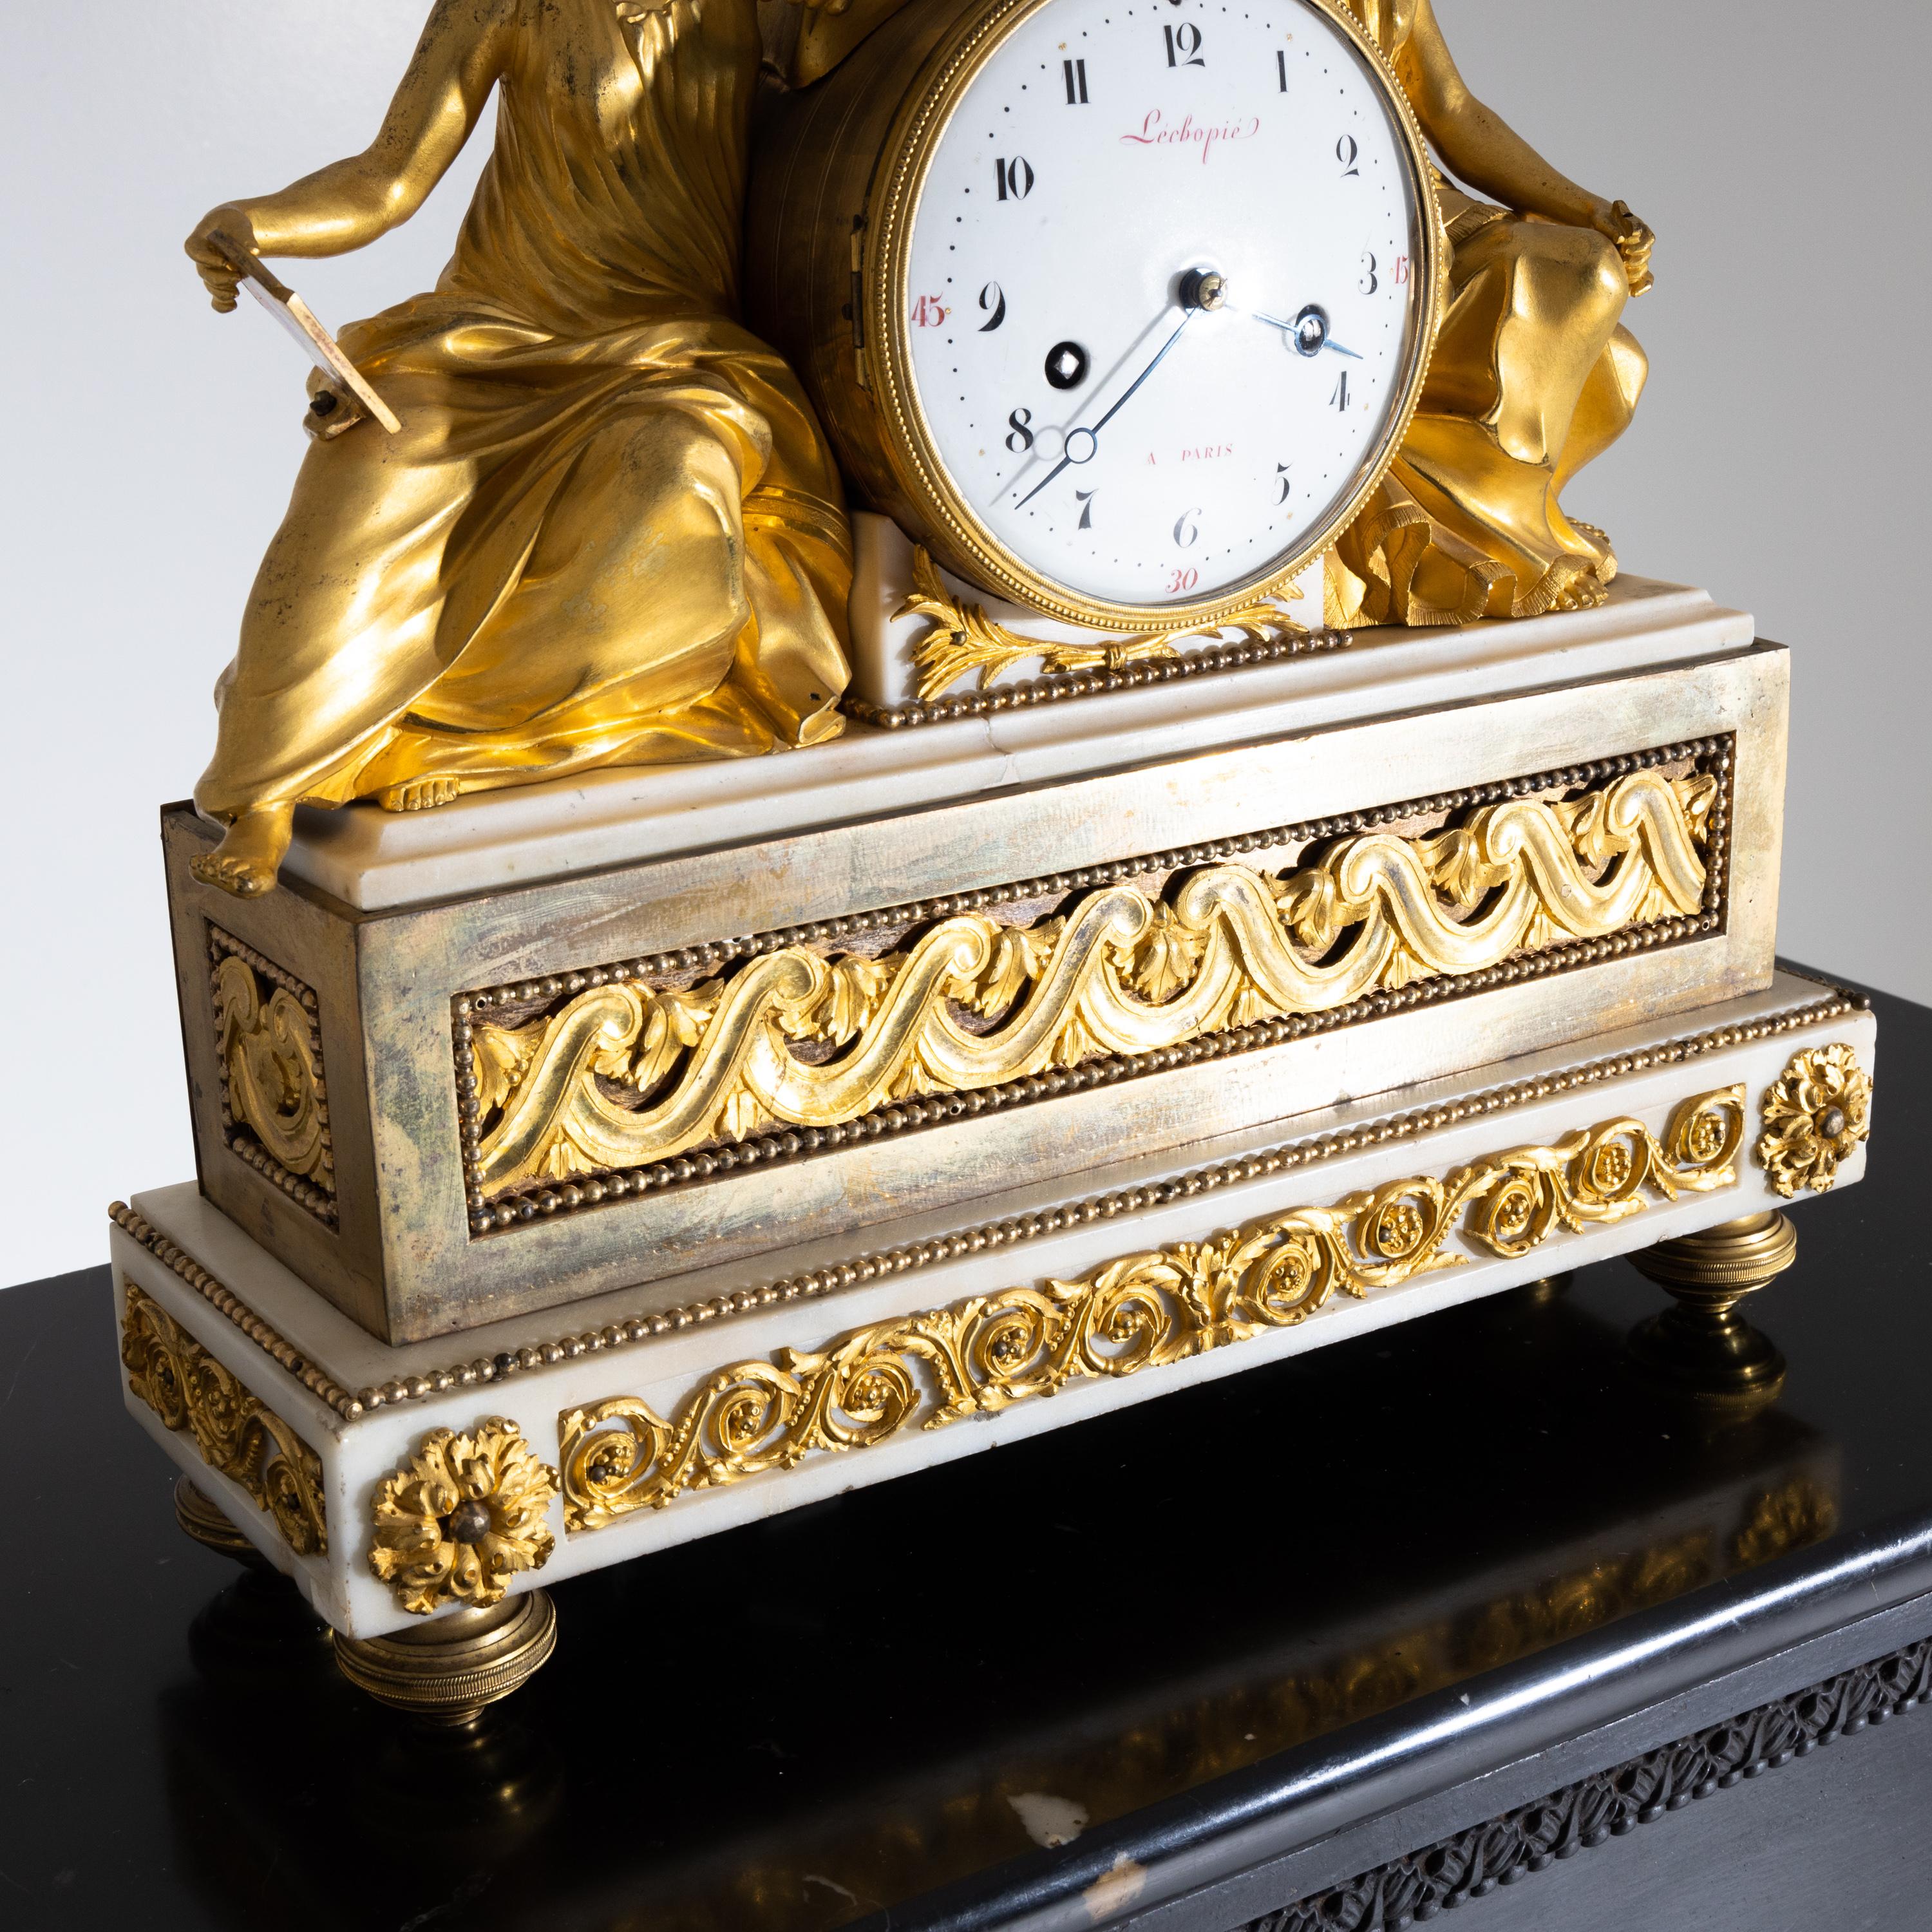 Bronze Pendule Clock “Studying the Tablets of the Law”, France, Paris, circa 1770-1780